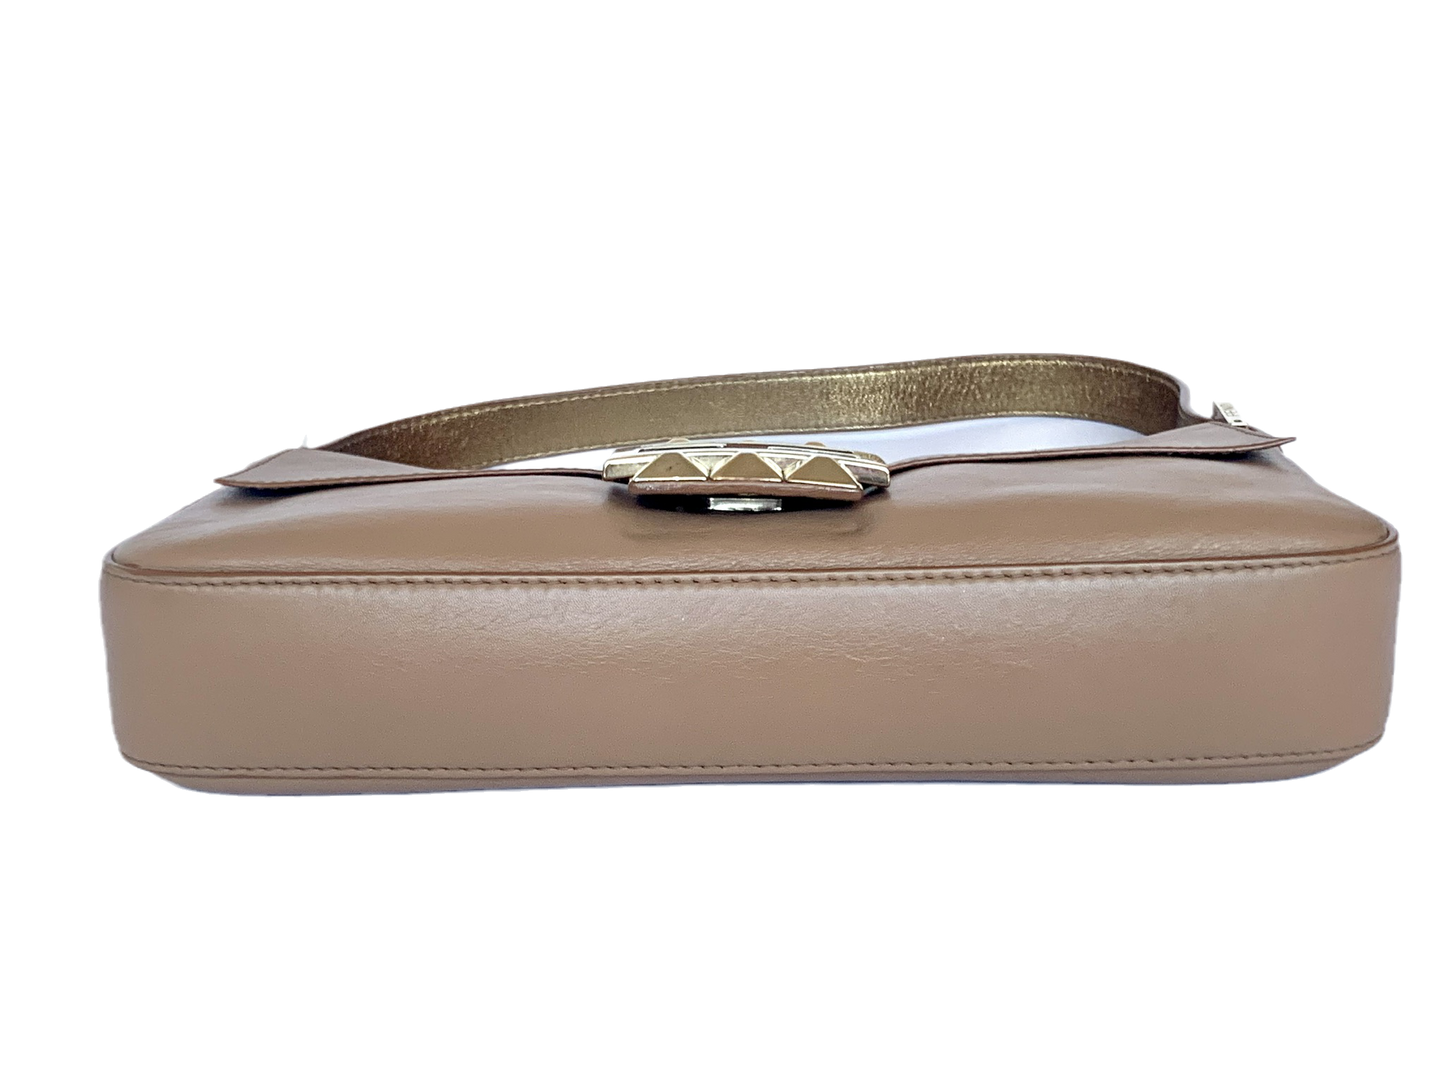 Fendi Baguette Beige Leather with Gold Studded Metal Buckle